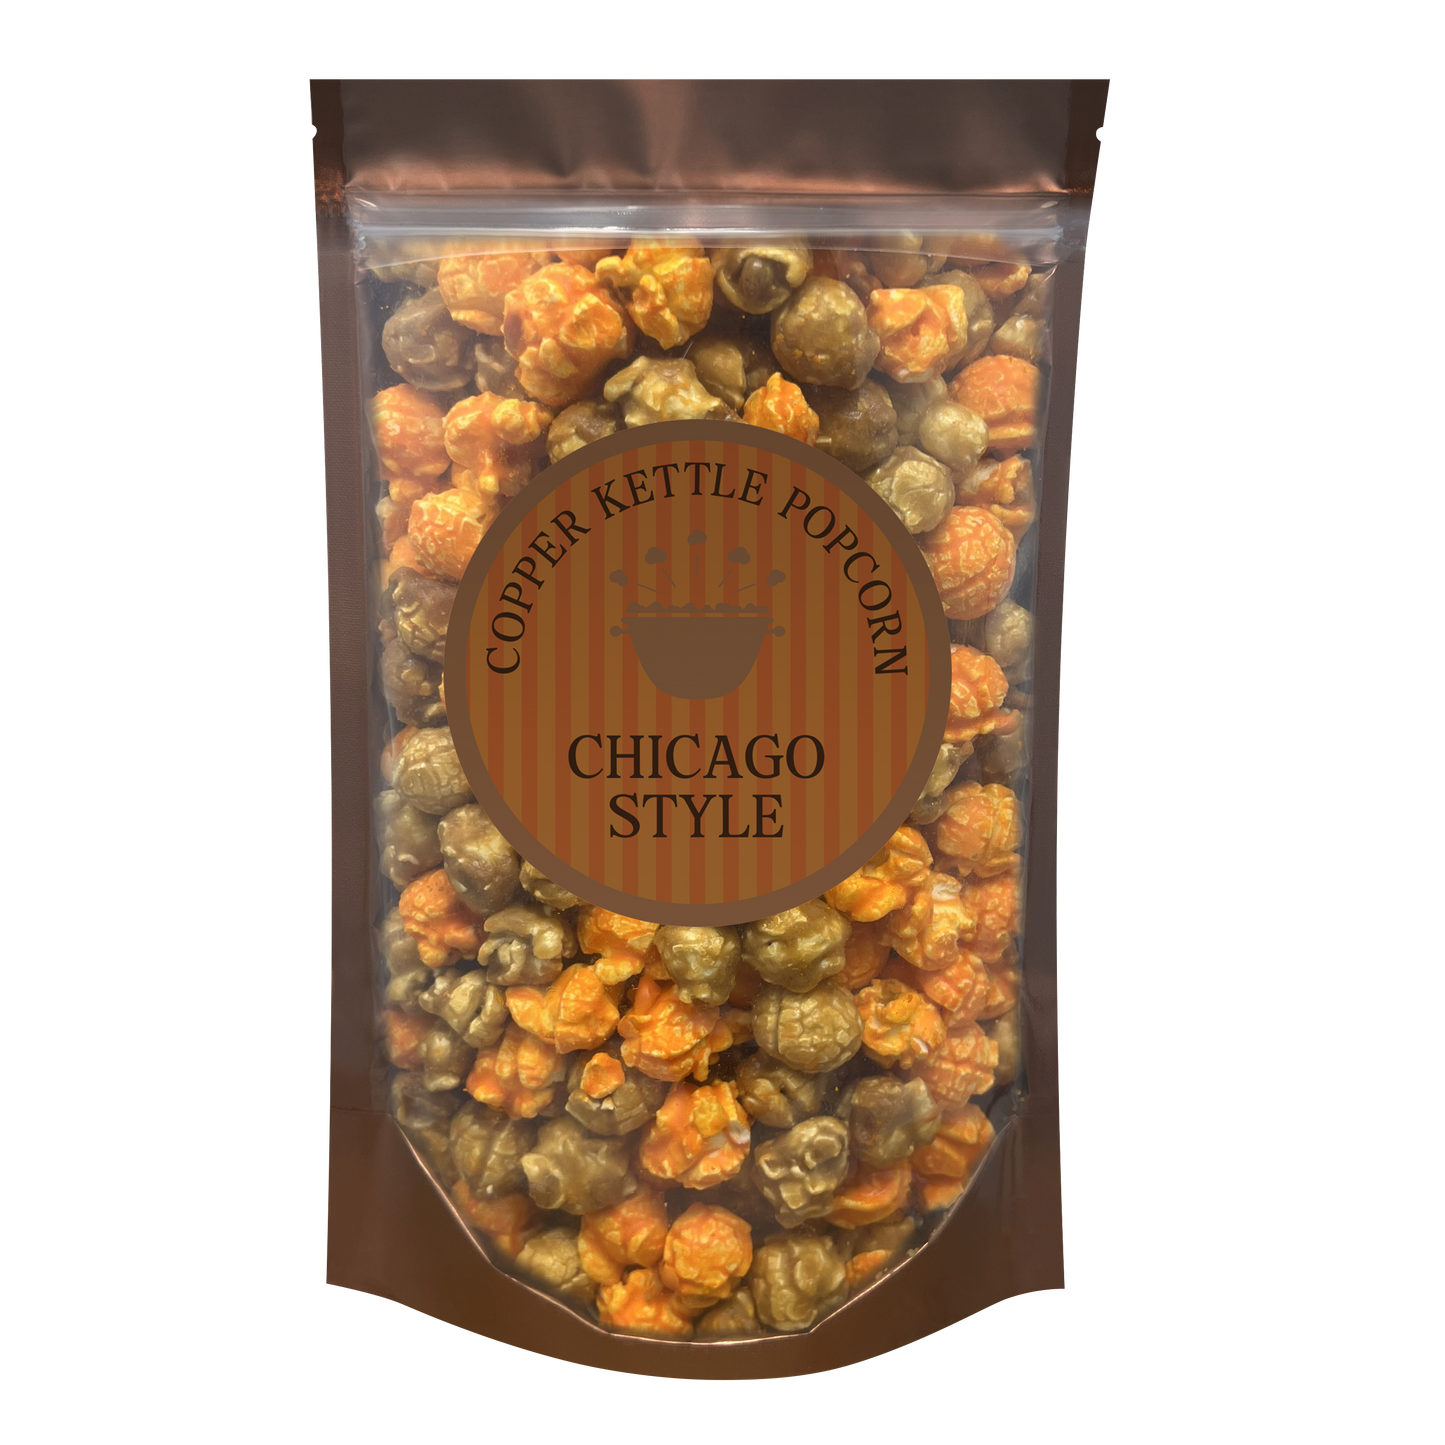 Chicago Style Bag - 6 Servings